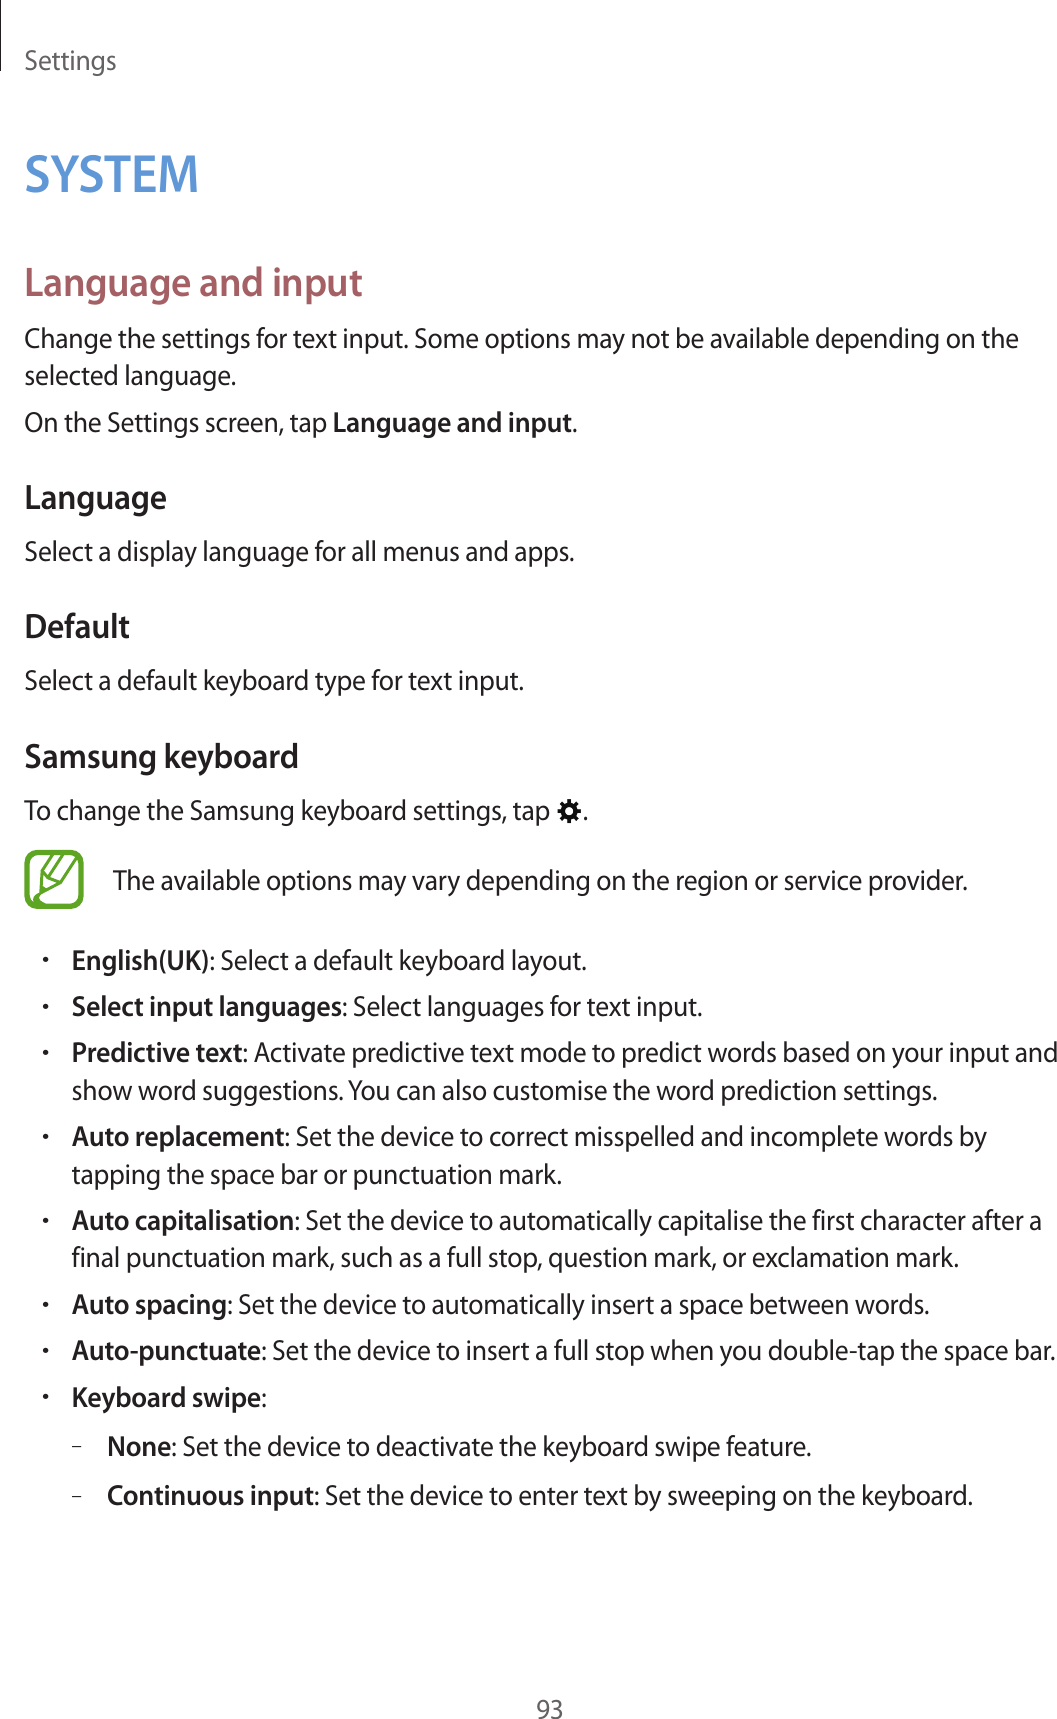 Settings93SYSTEMLanguage and inputChange the settings for text input. Some options may not be available depending on the selected language.On the Settings screen, tap Language and input.LanguageSelect a display language for all menus and apps.DefaultSelect a default keyboard type for text input.Samsung keyboardTo change the Samsung keyboard settings, tap  .The available options may vary depending on the region or service provider.•English(UK): Select a default keyboard layout.•Select input languages: Select languages for text input.•Predictive text: Activate predictive text mode to predict words based on your input and show word suggestions. You can also customise the word prediction settings.•Auto replacement: Set the device to correct misspelled and incomplete words by tapping the space bar or punctuation mark.•Auto capitalisation: Set the device to automatically capitalise the first character after a final punctuation mark, such as a full stop, question mark, or exclamation mark.•Auto spacing: Set the device to automatically insert a space between words.•Auto-punctuate: Set the device to insert a full stop when you double-tap the space bar.•Keyboard swipe:–None: Set the device to deactivate the keyboard swipe feature.–Continuous input: Set the device to enter text by sweeping on the keyboard.